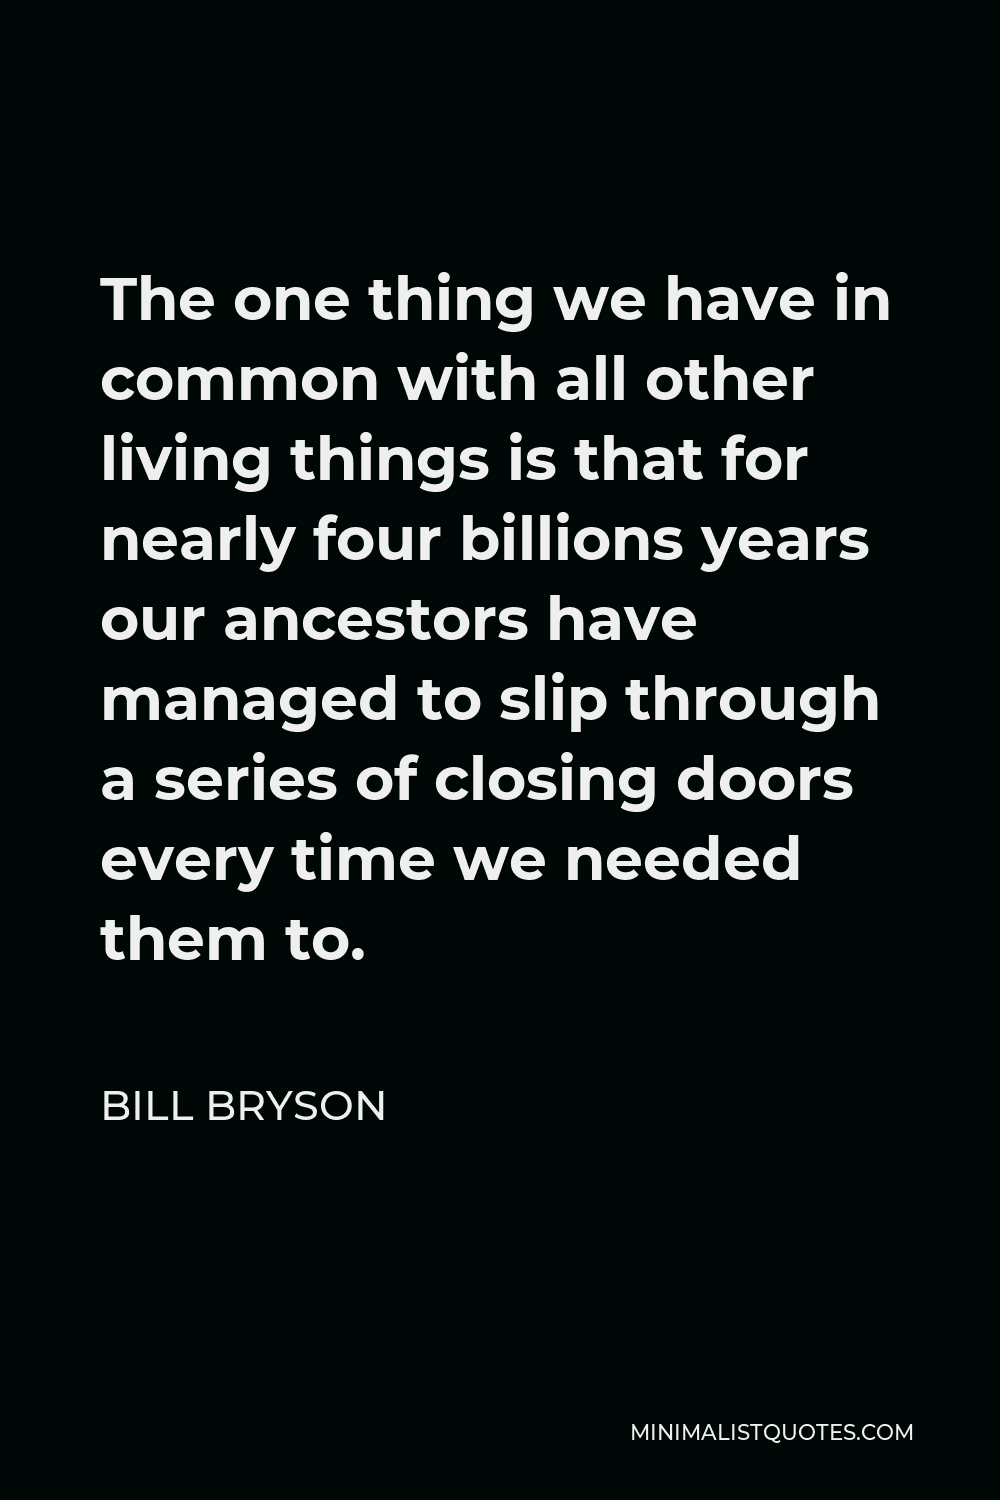 Bill Bryson Quote - The one thing we have in common with all other living things is that for nearly four billions years our ancestors have managed to slip through a series of closing doors every time we needed them to.